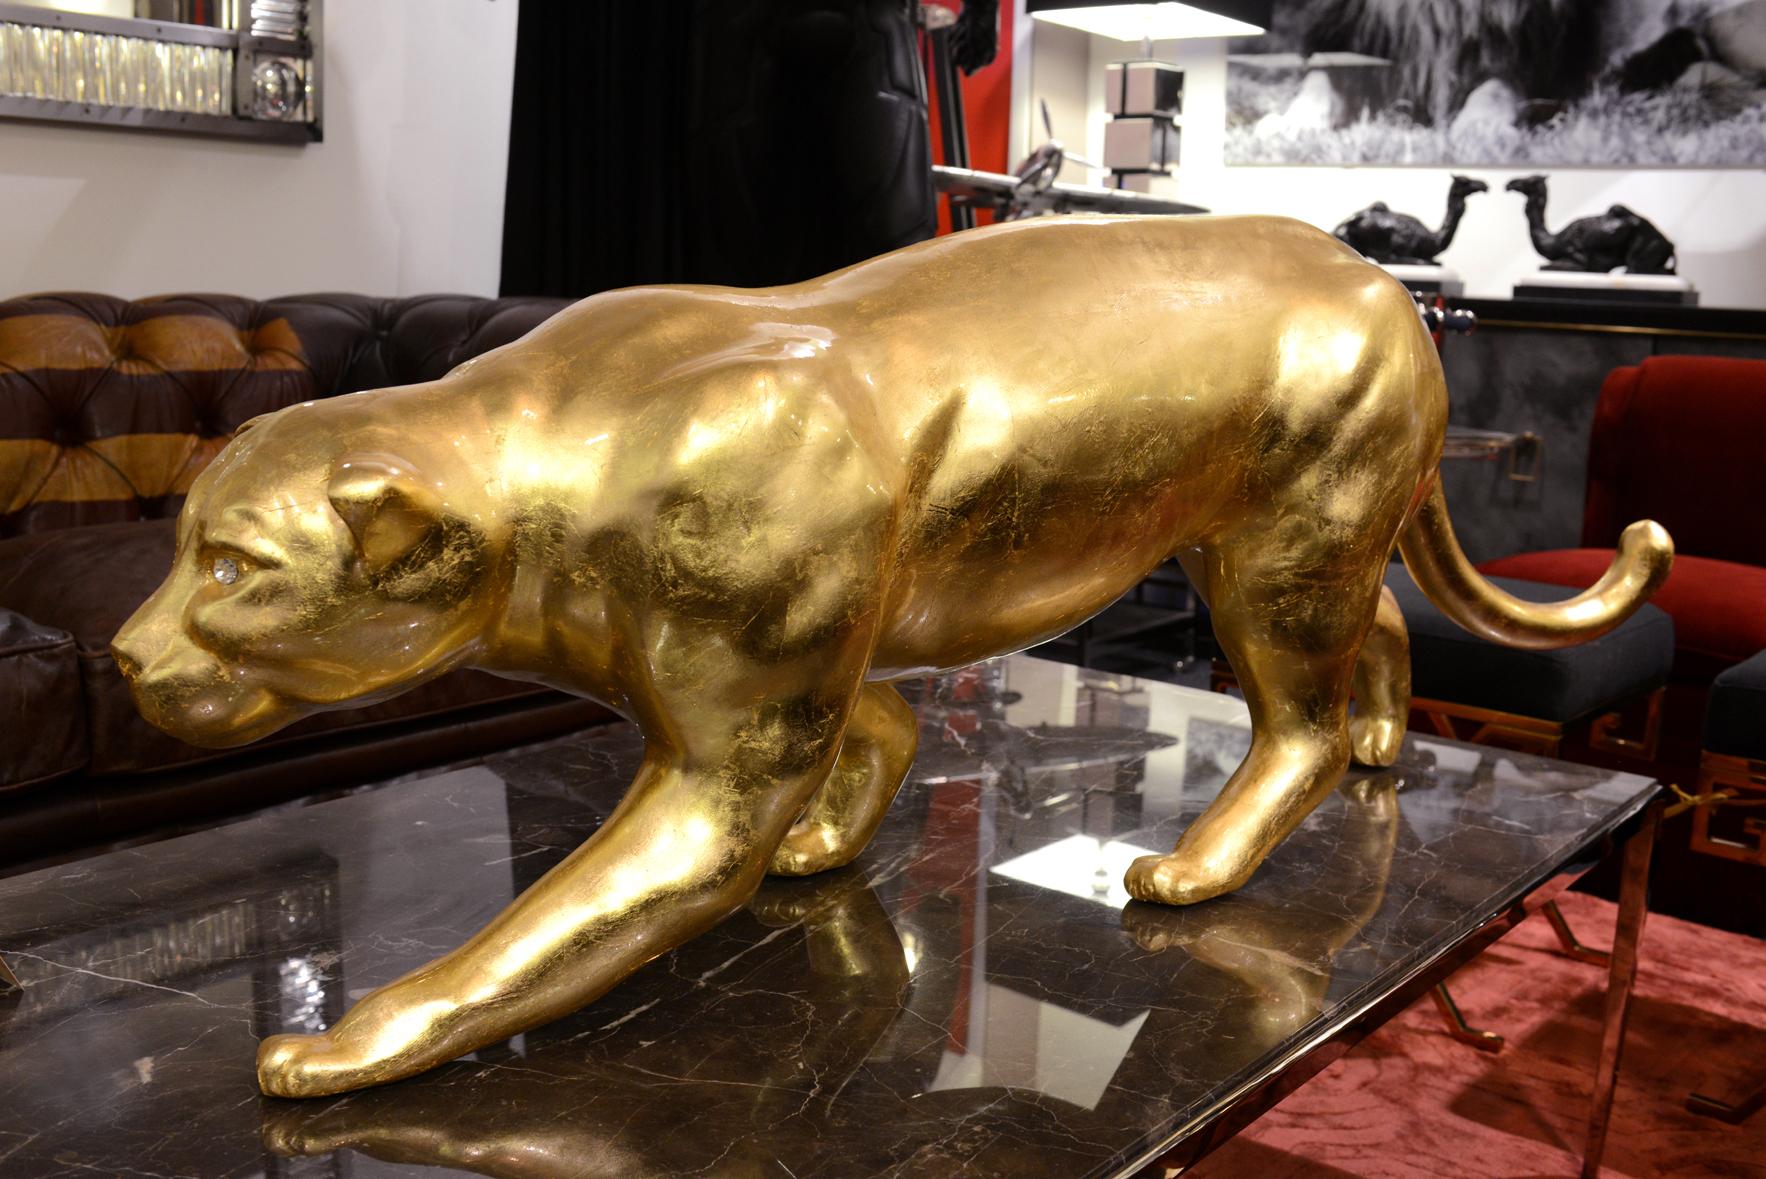 Panther Sculpture Resin in Gold Finish,
Eyes in SWAROVSKI Crystals.
Numbered and limited Edition.